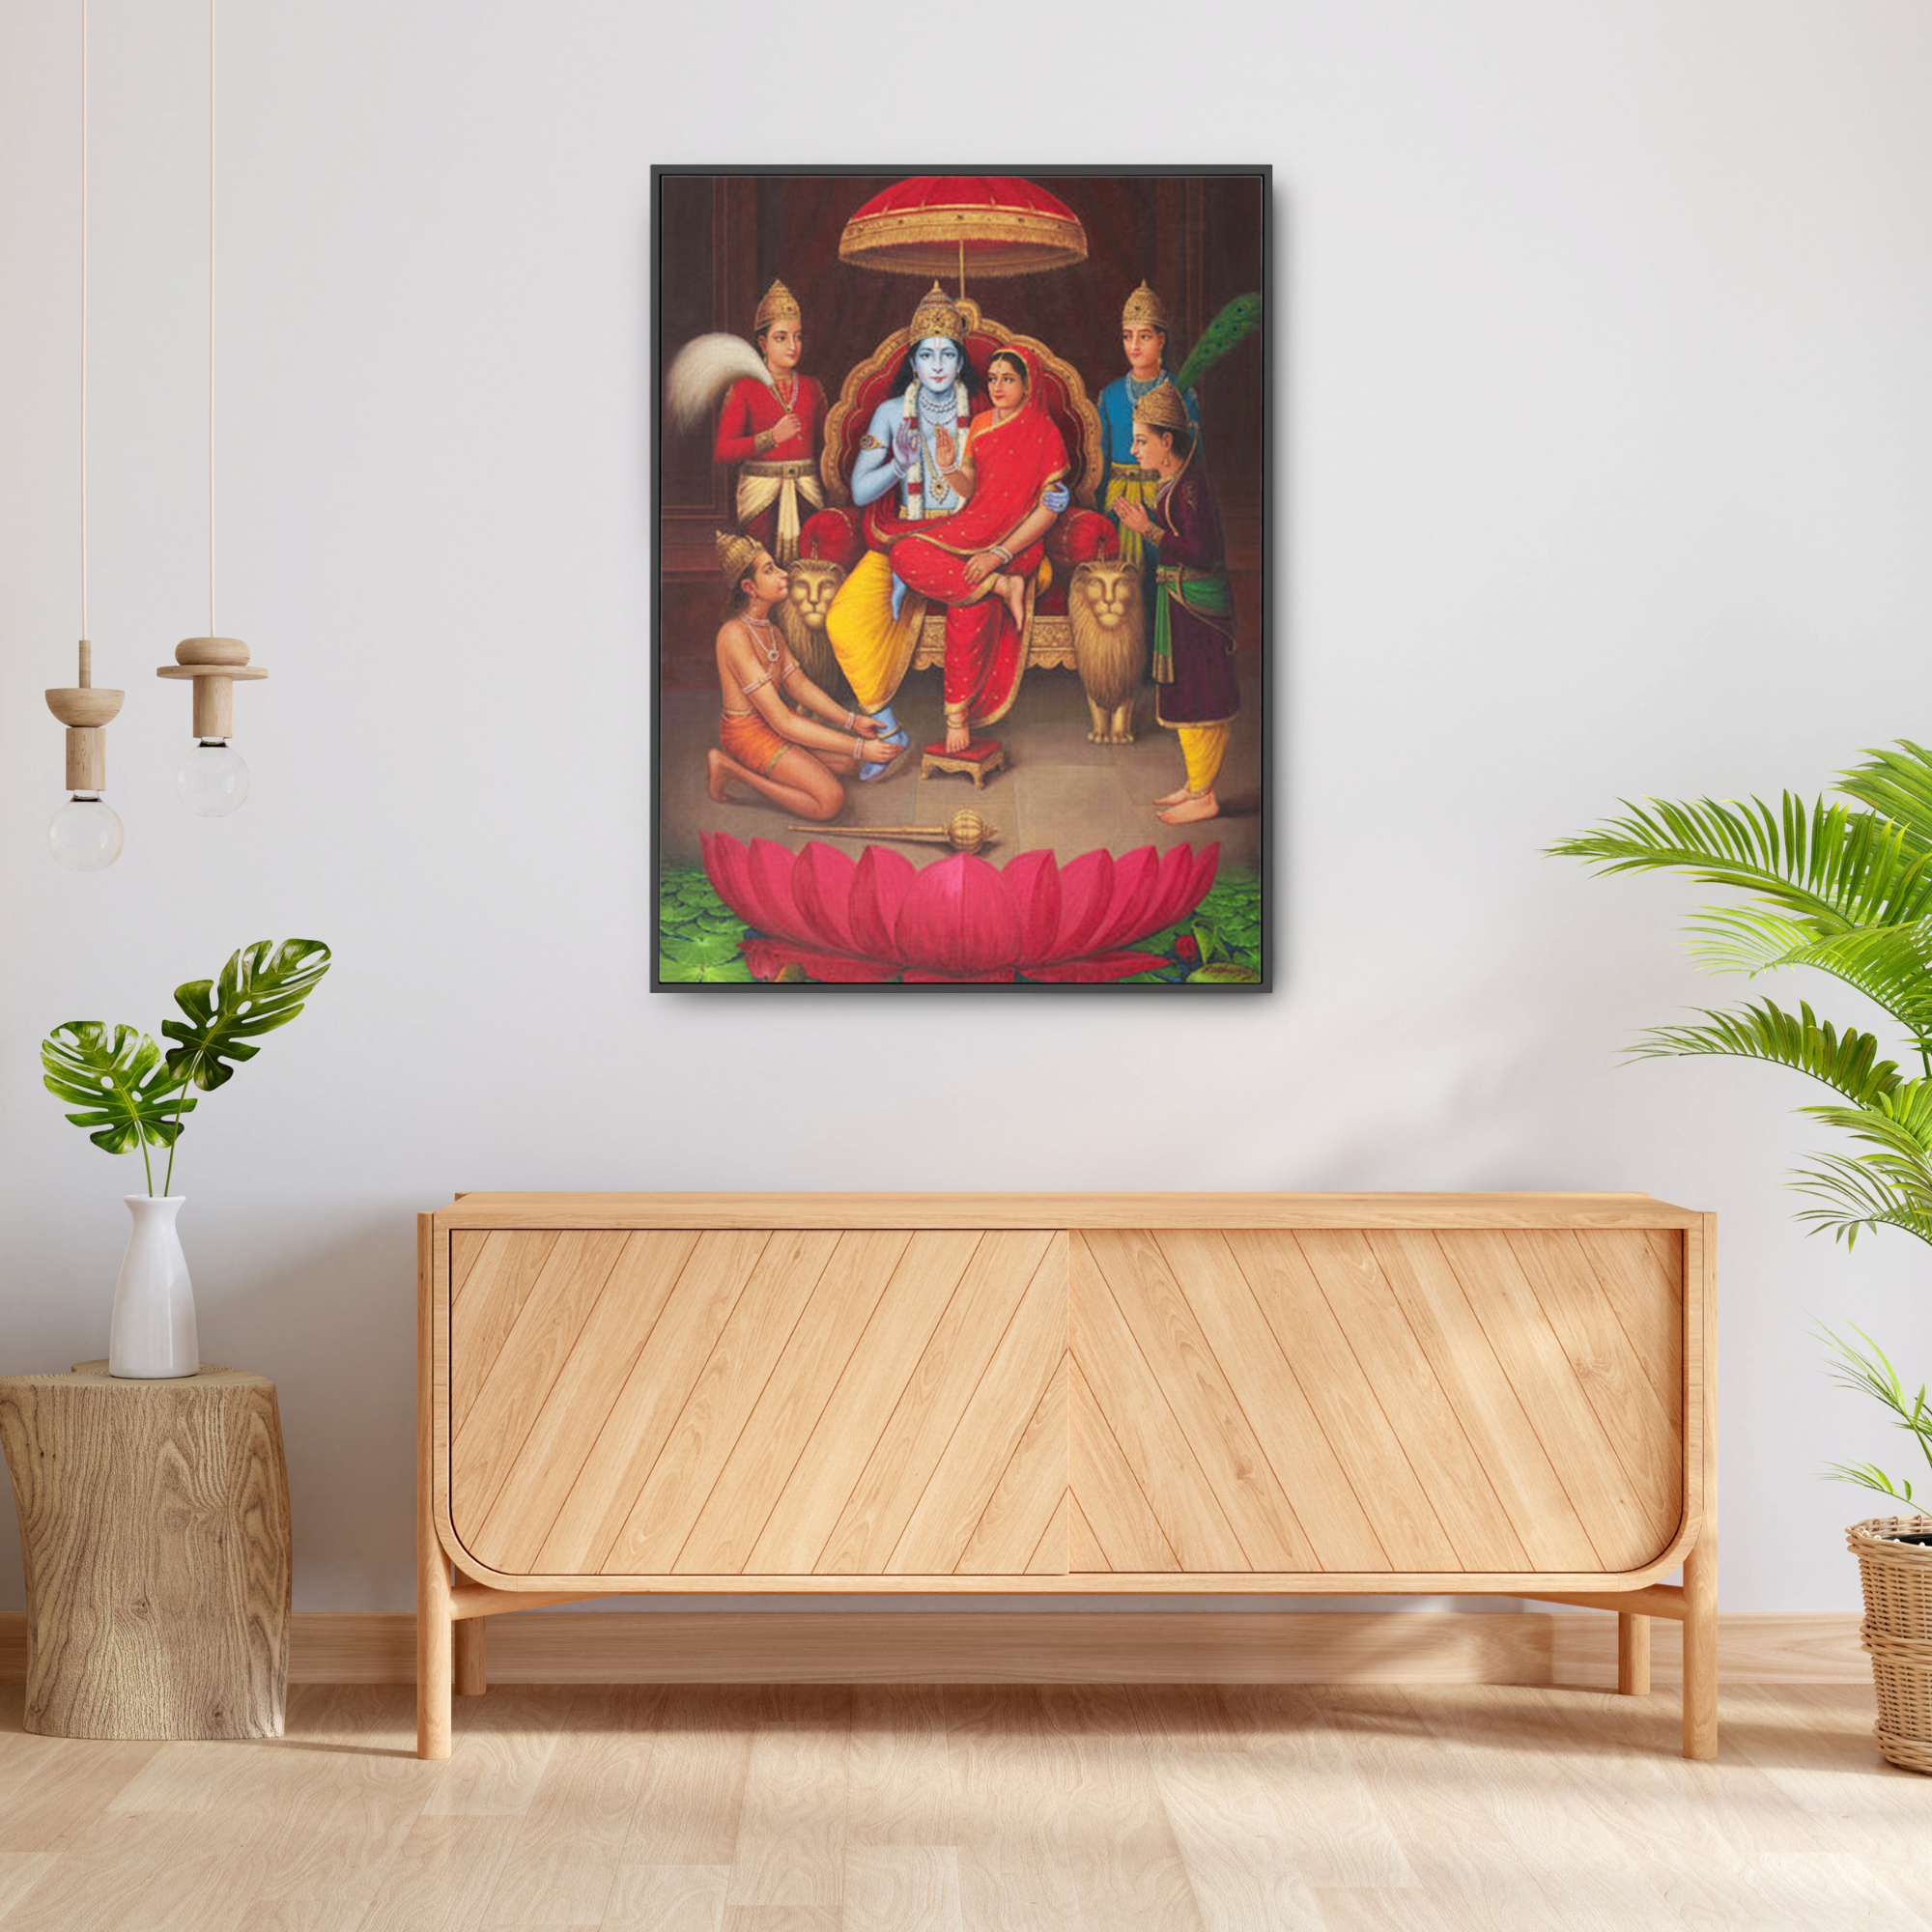 Aesthetic Picture of Shri Ram Panchayatan painting by Raghu Vyas hung in a living room